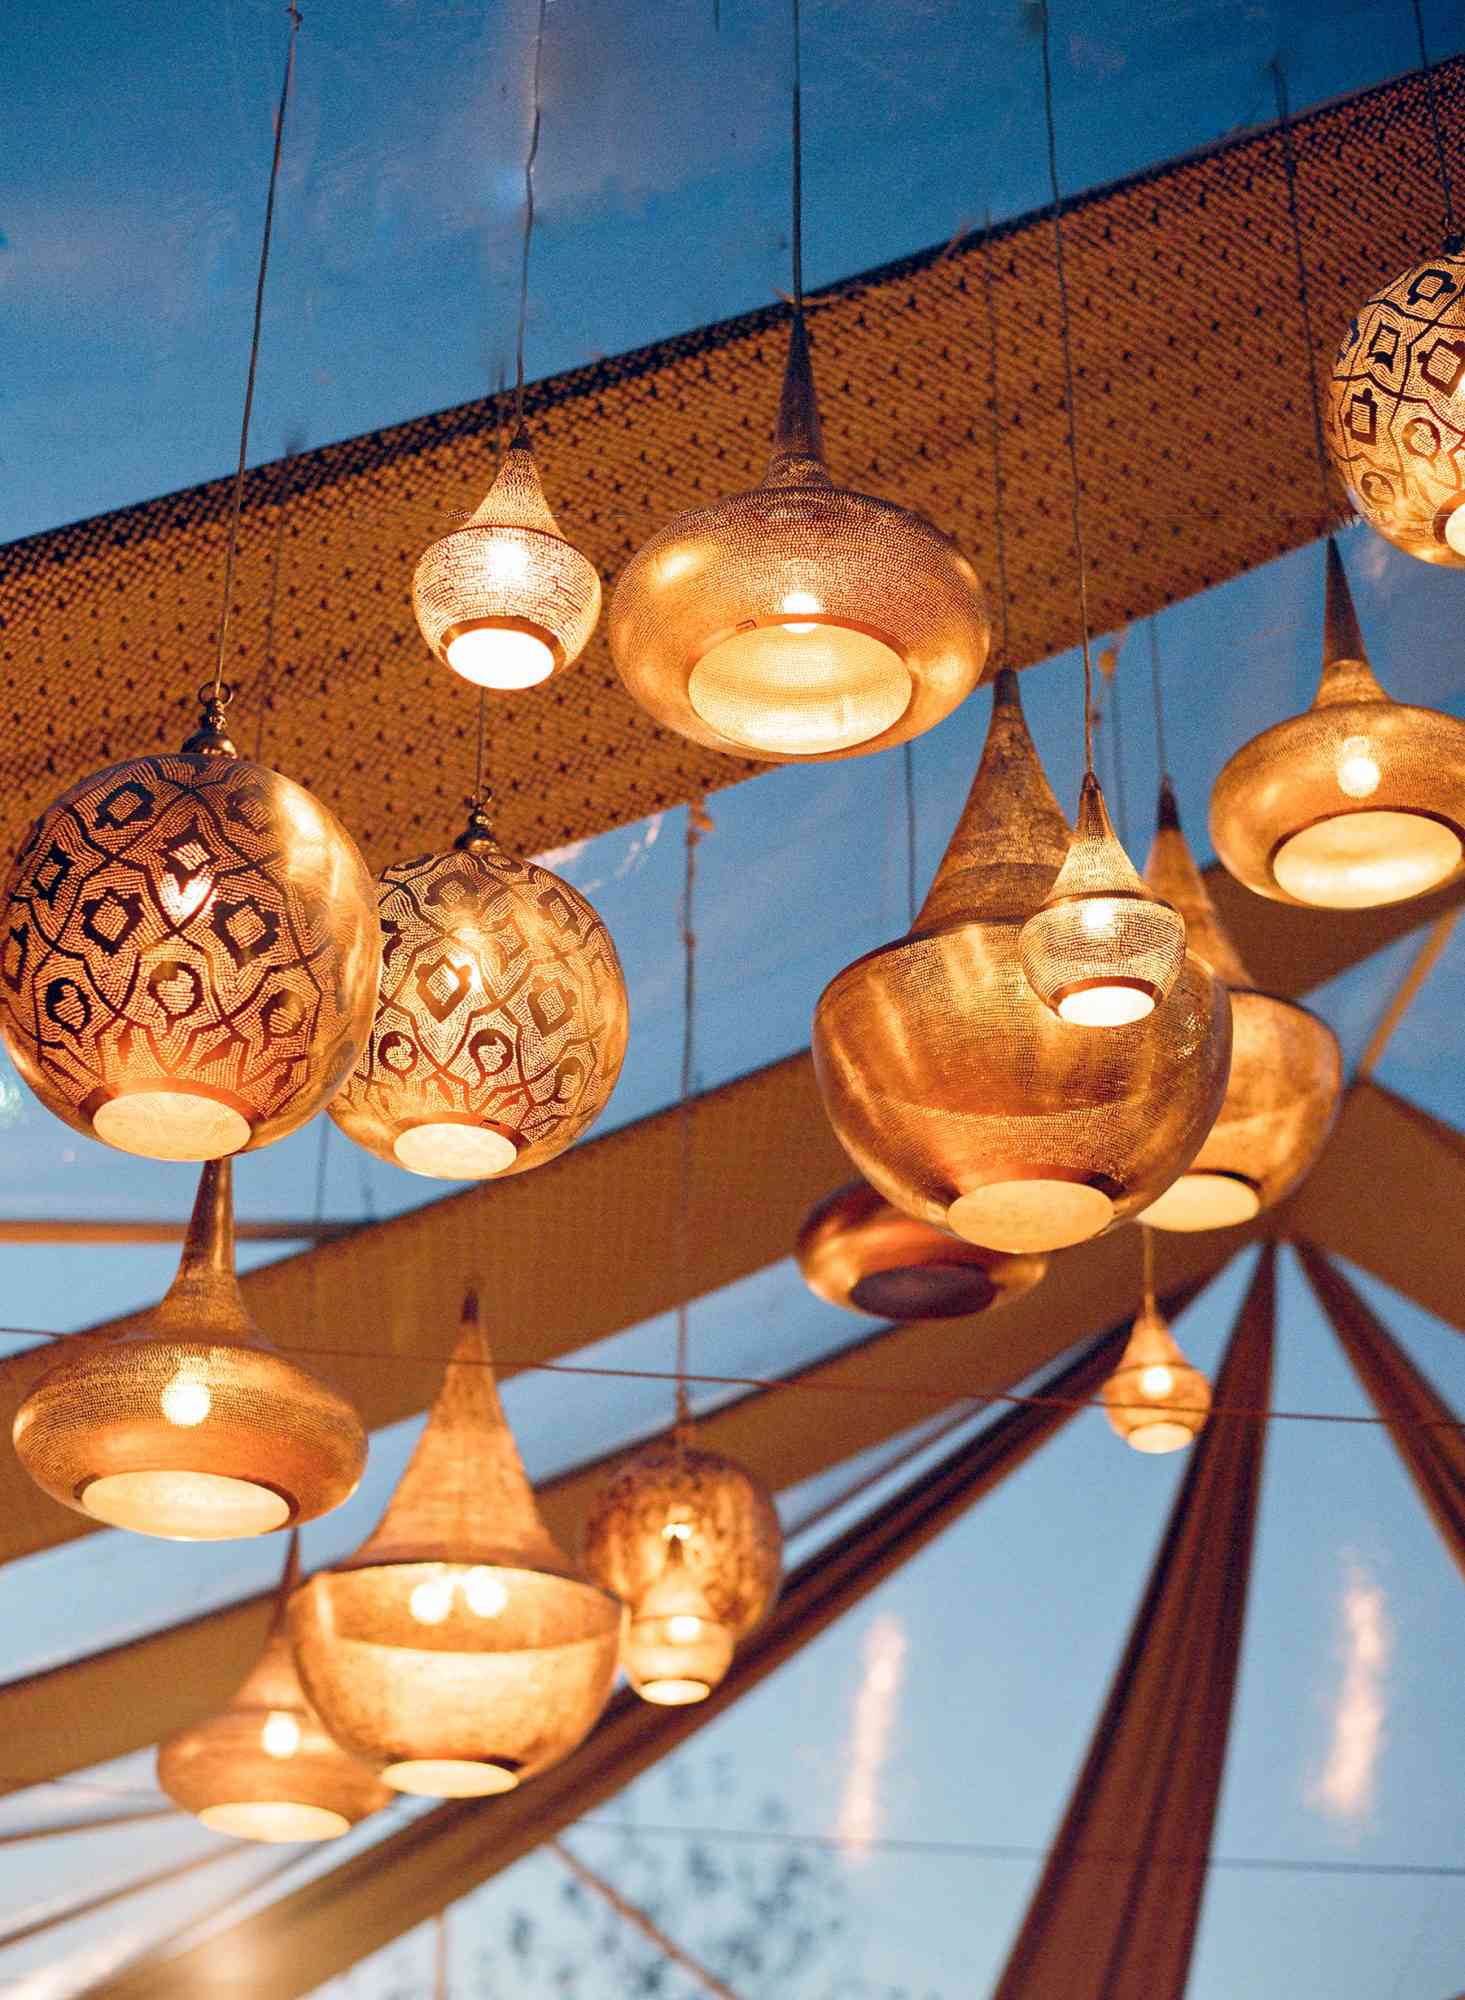 Moroccan Lanterns in the Tent